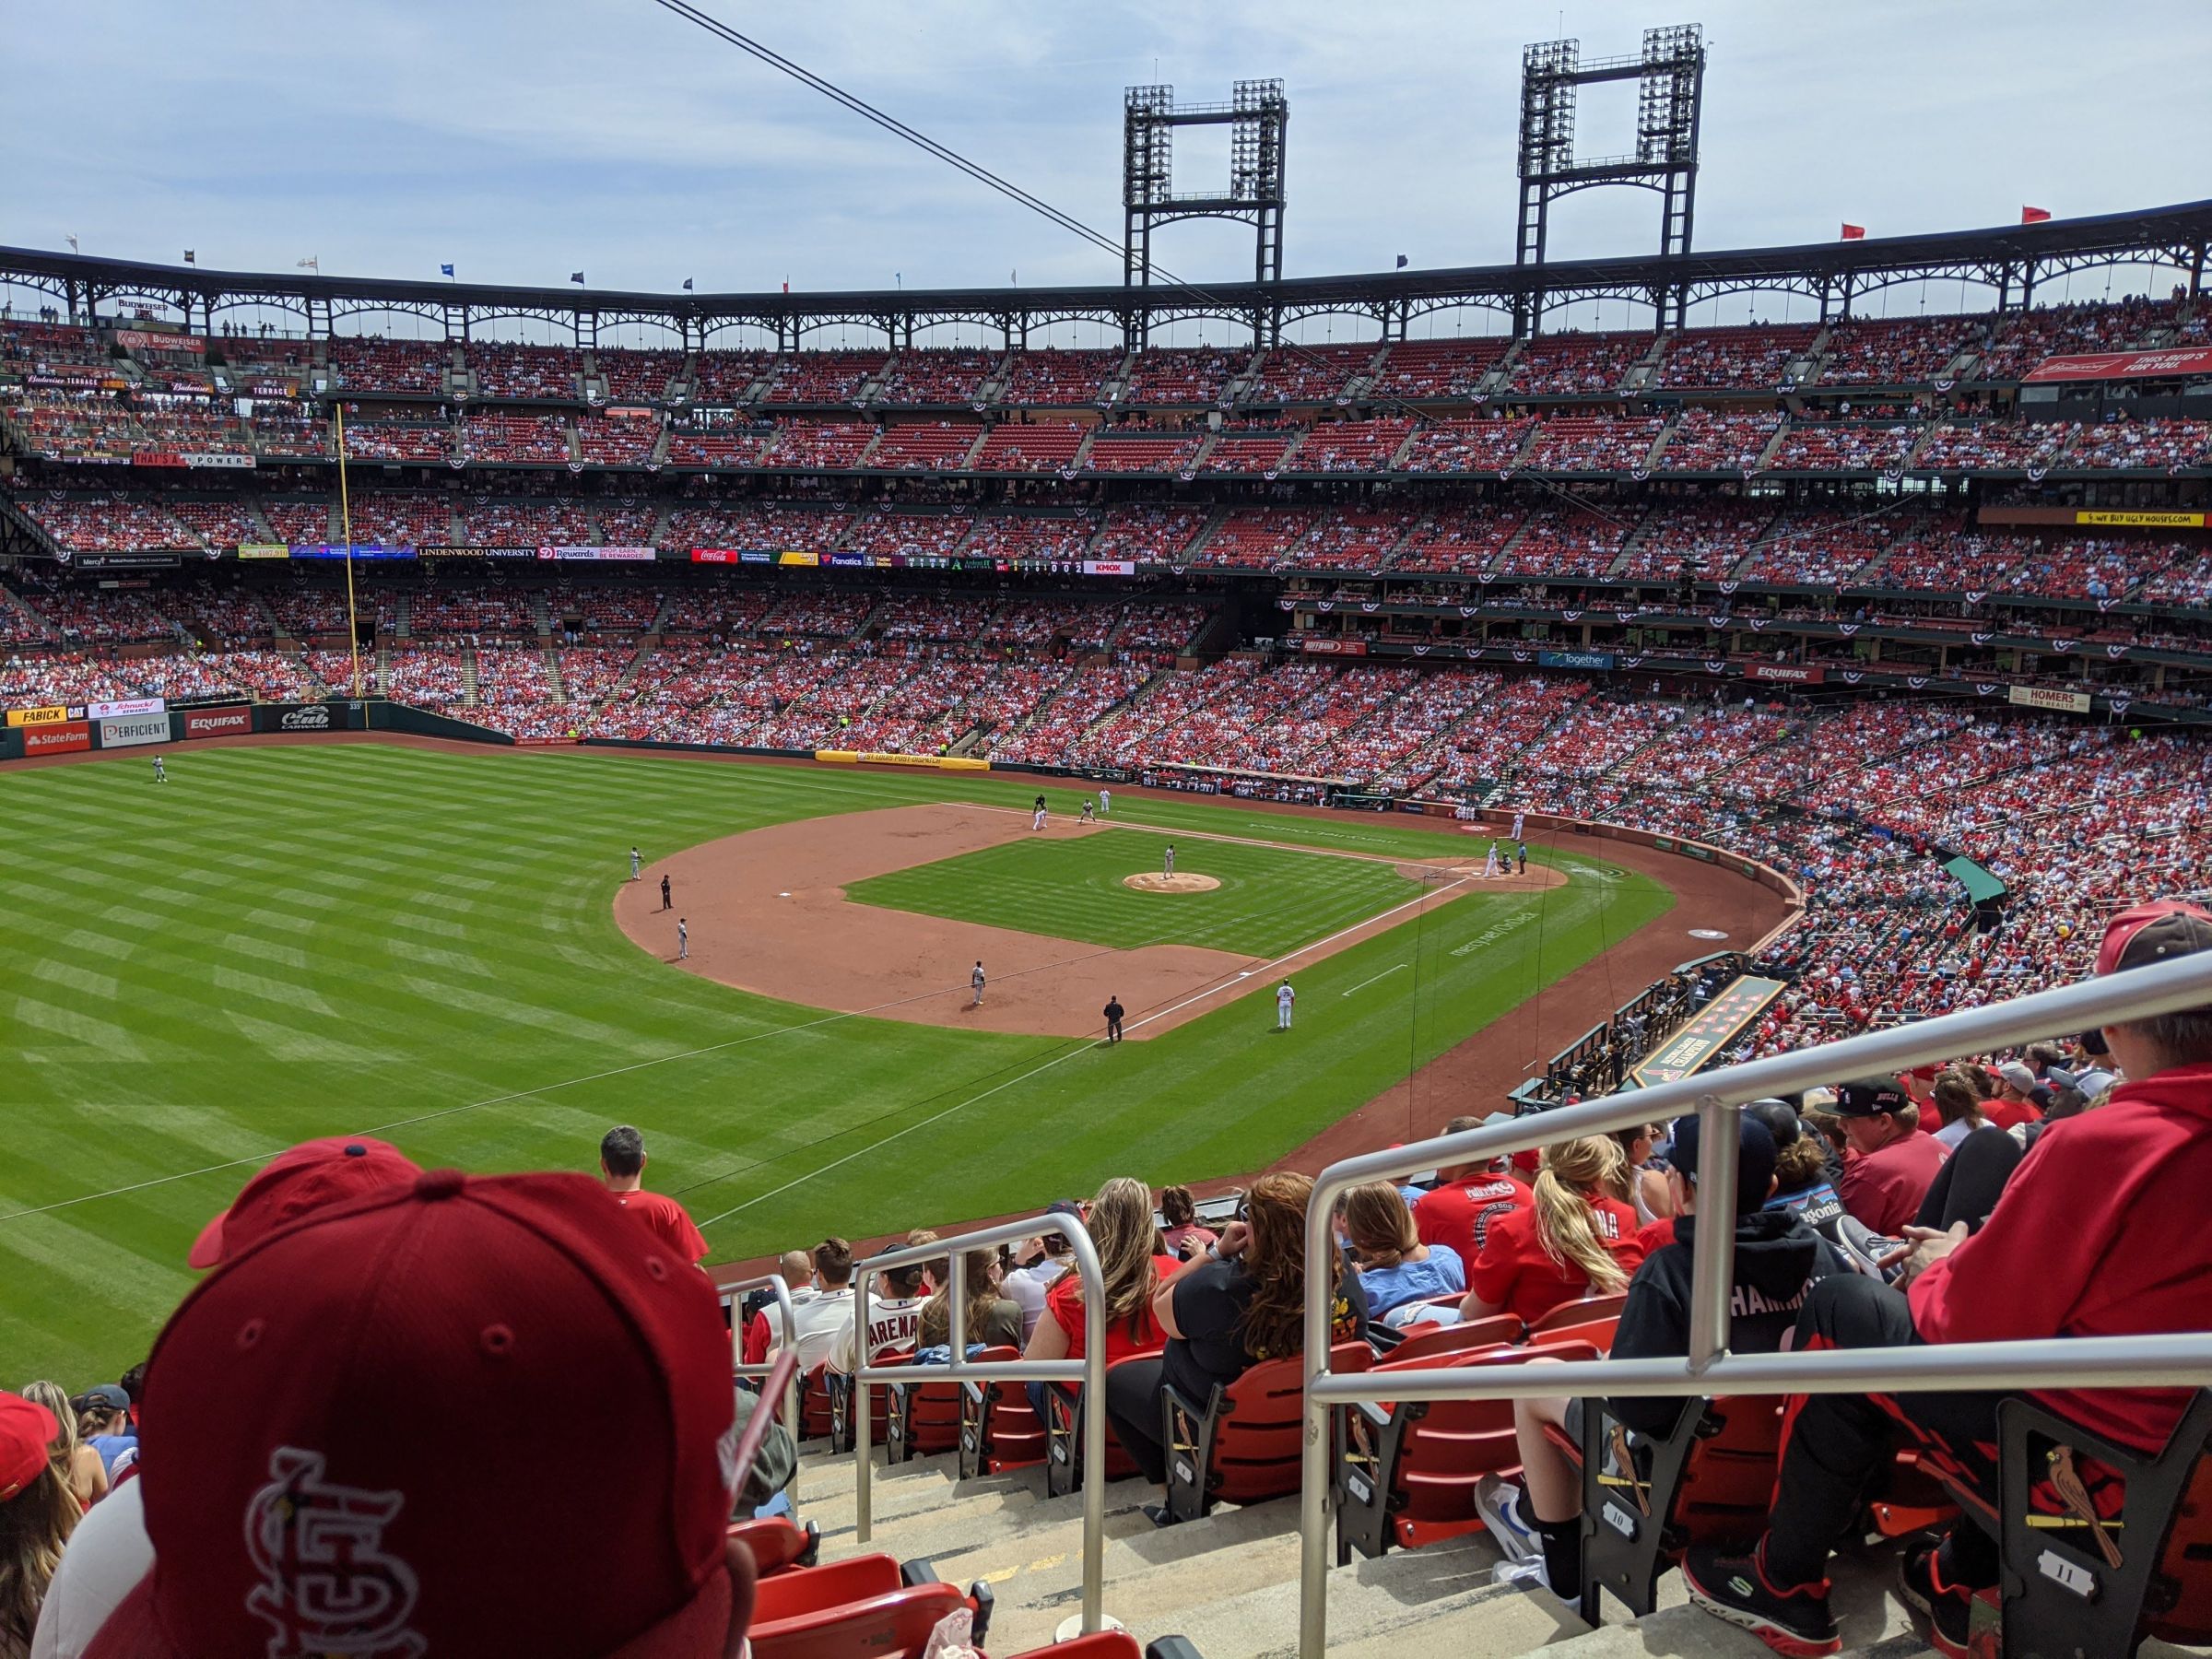 section 267, row 13 seat view  - busch stadium